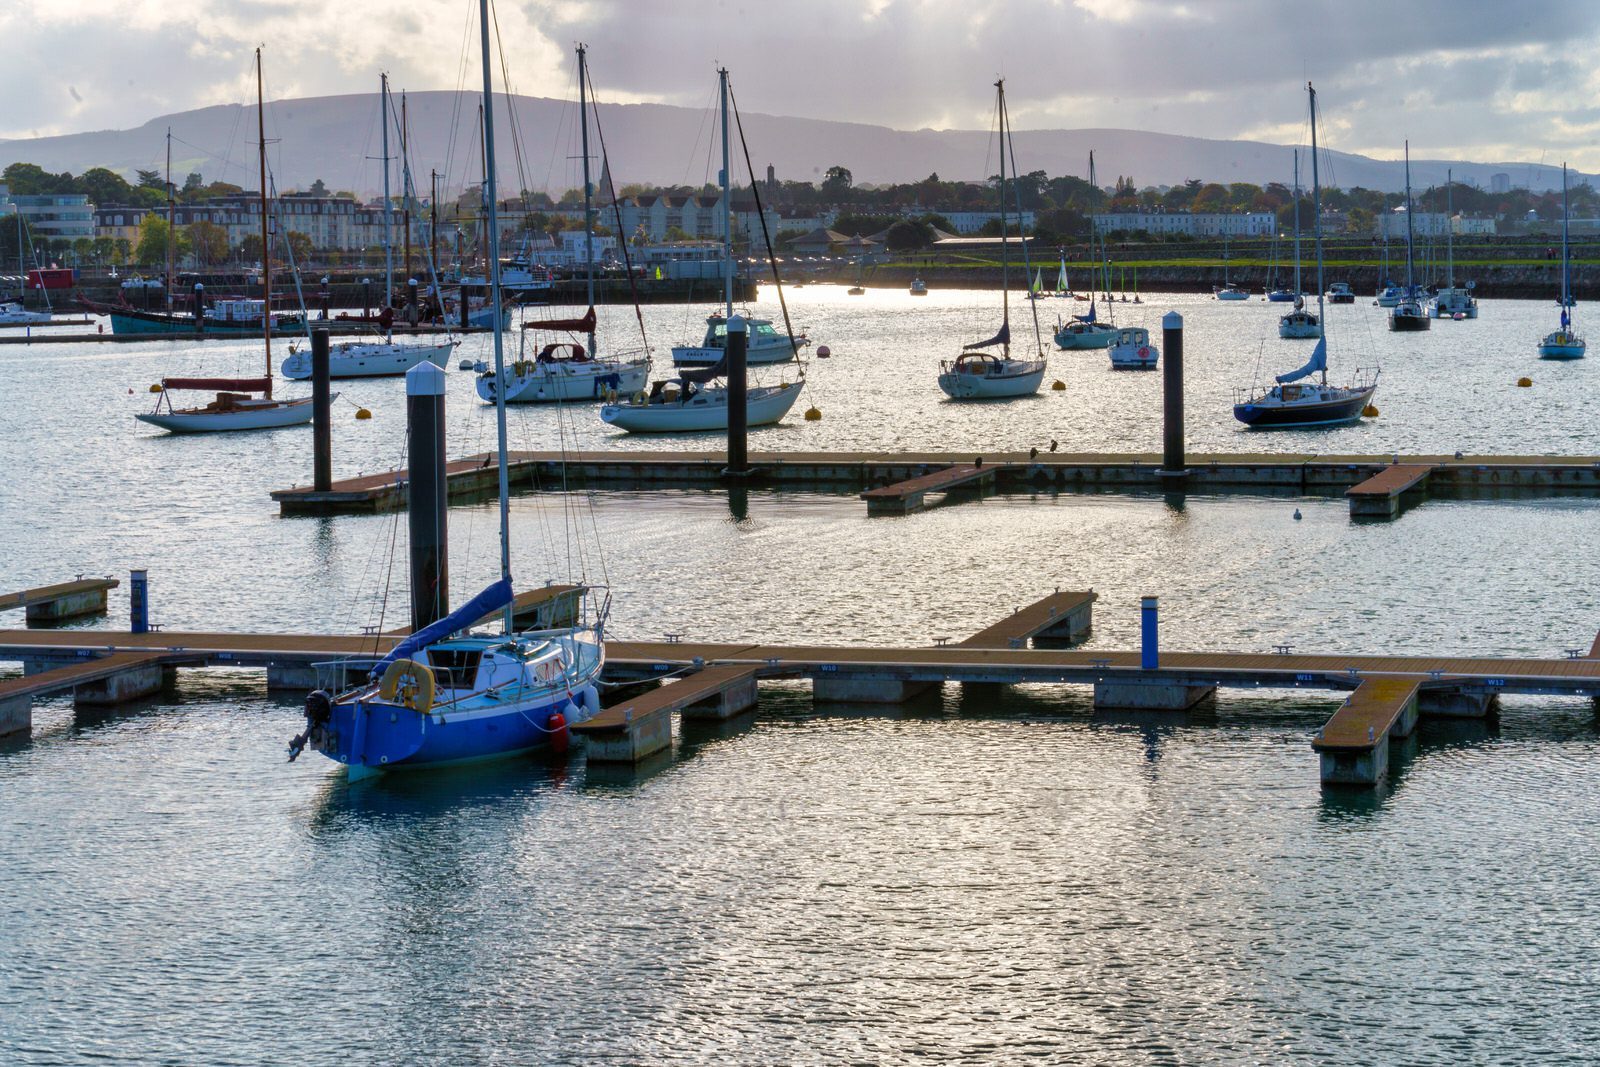 THE SECTION OF THE MARINA NEAR THE WESTERN BREAKWATER [DUN LAOGHAIRE HARBOUR] 009